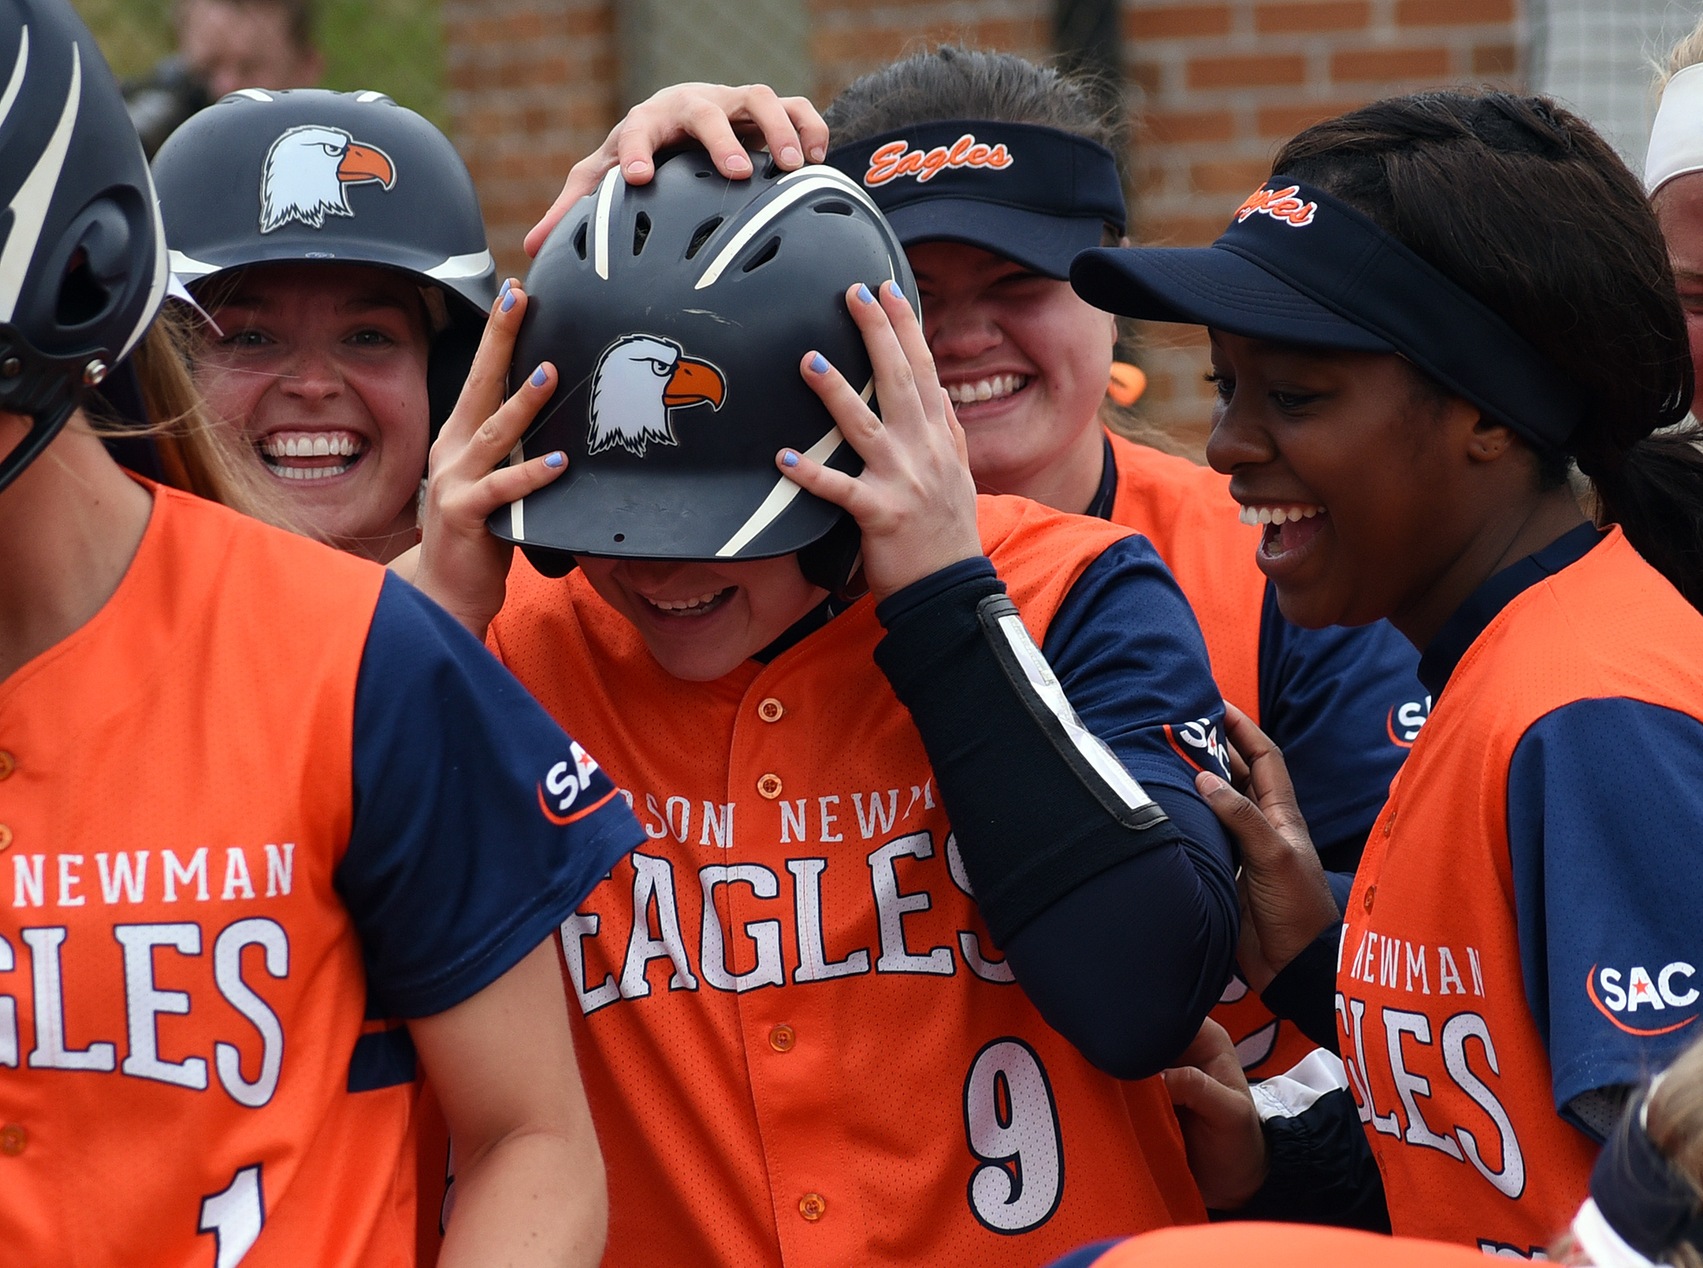 Eagles set for Wednesday matchup against Mars Hill